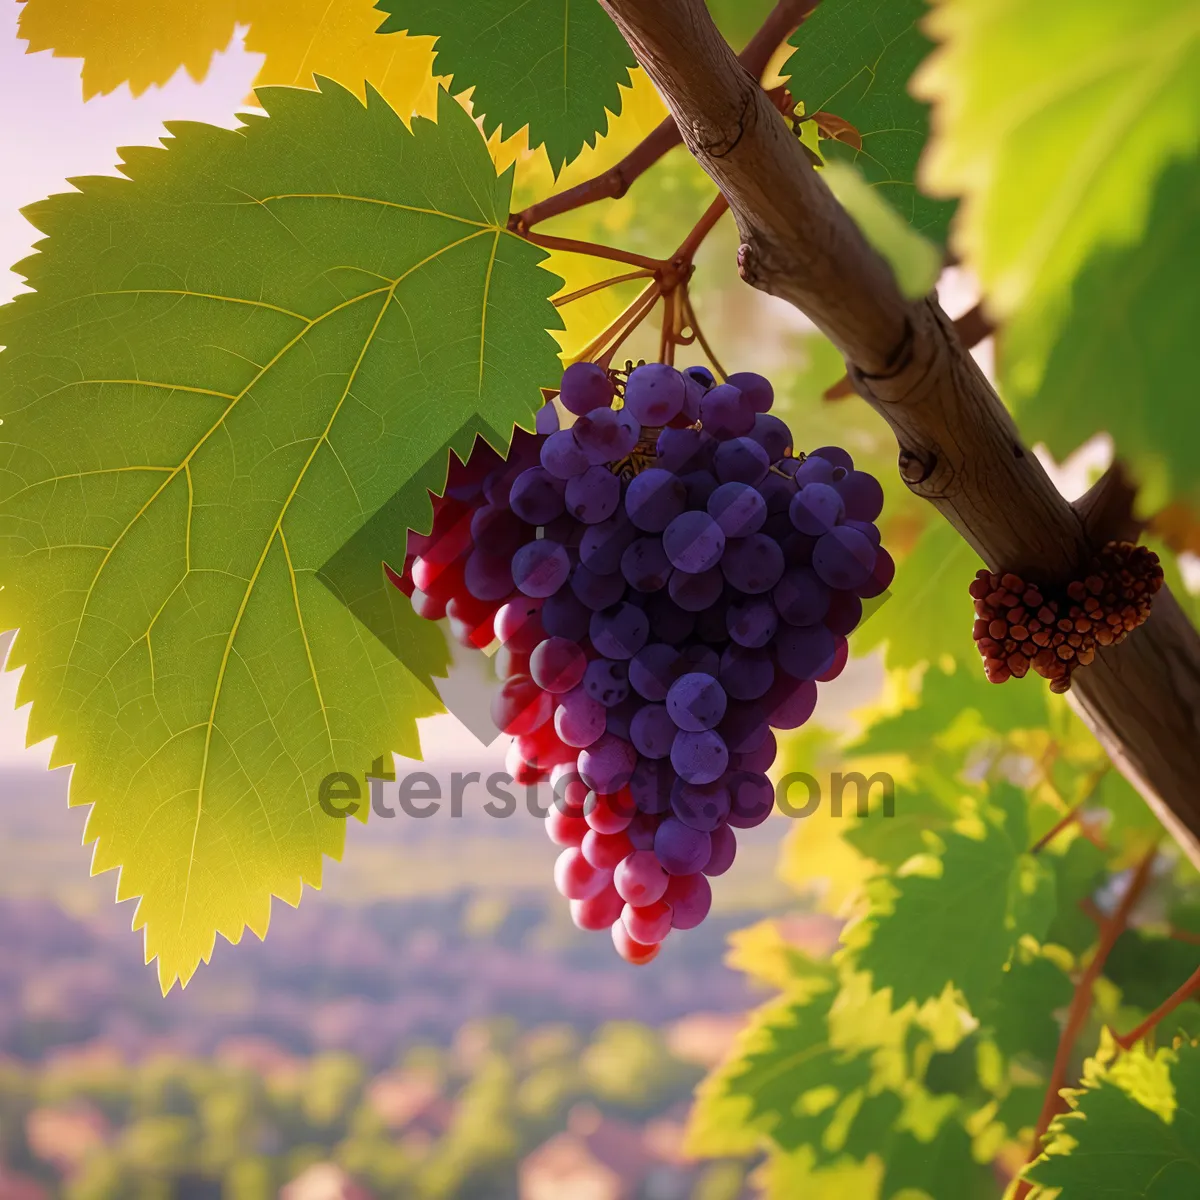 Picture of Juicy Cluster of Ripe Grapes in Vineyard